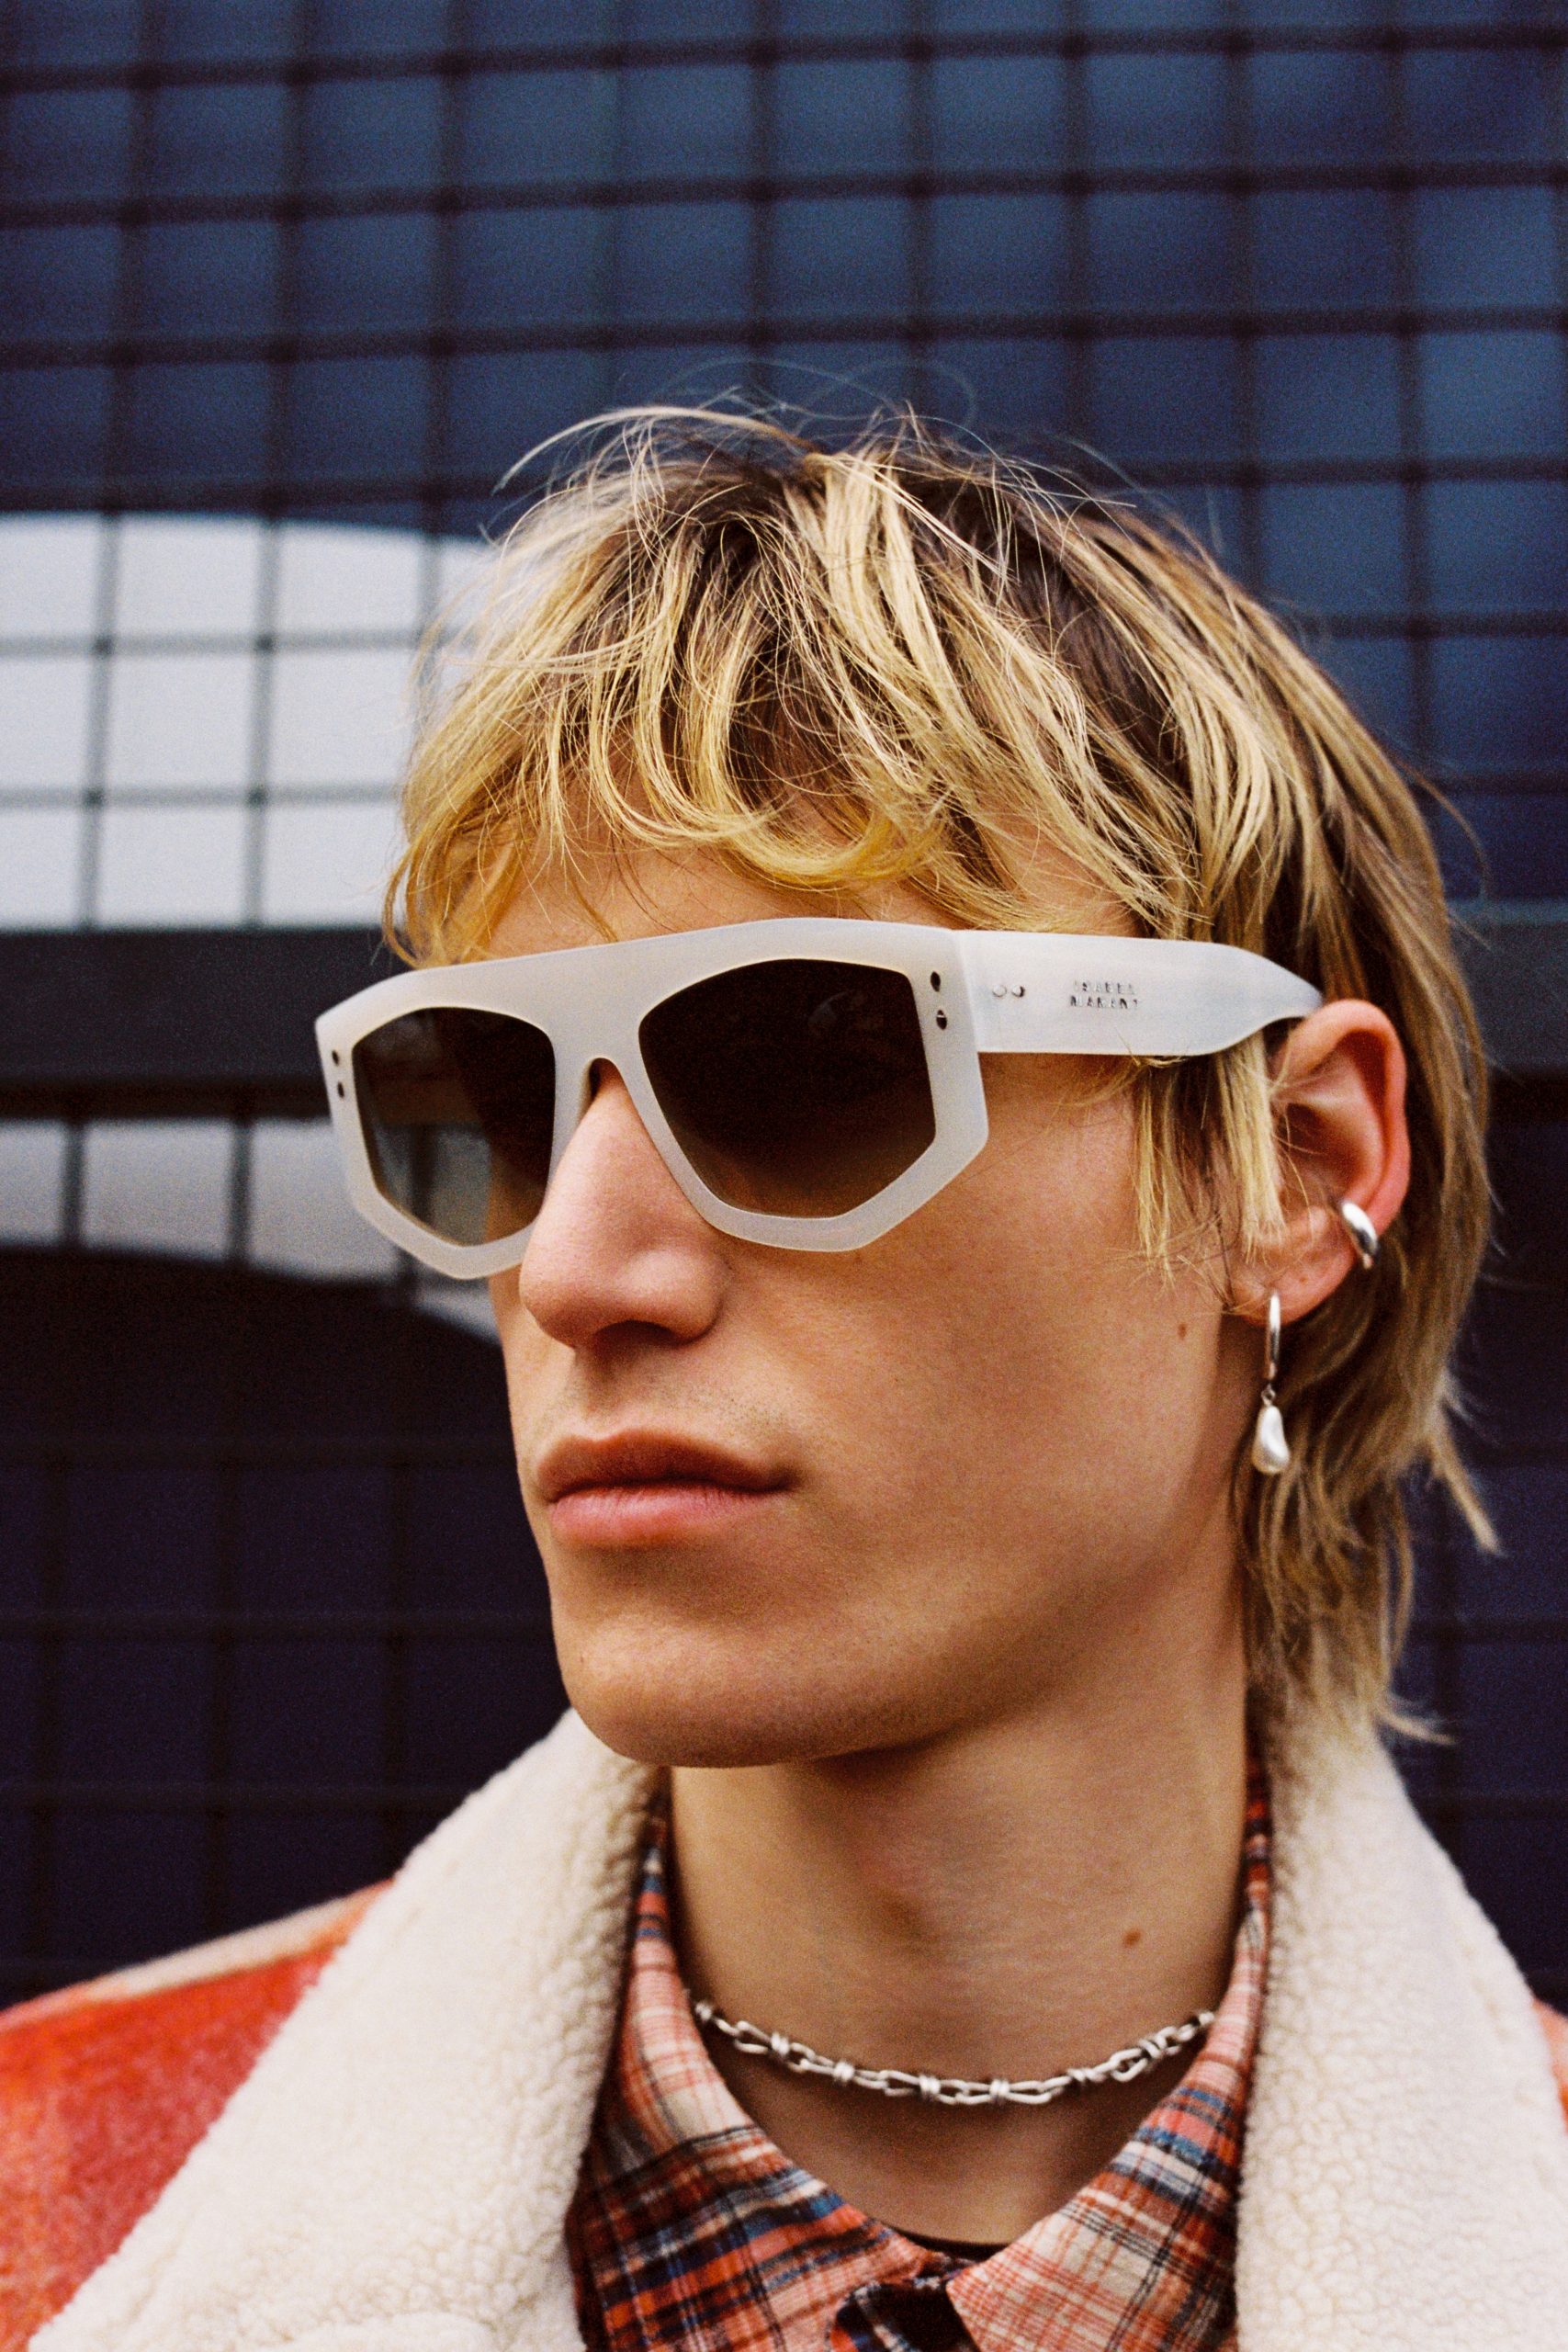 Blond man with white sunglasses